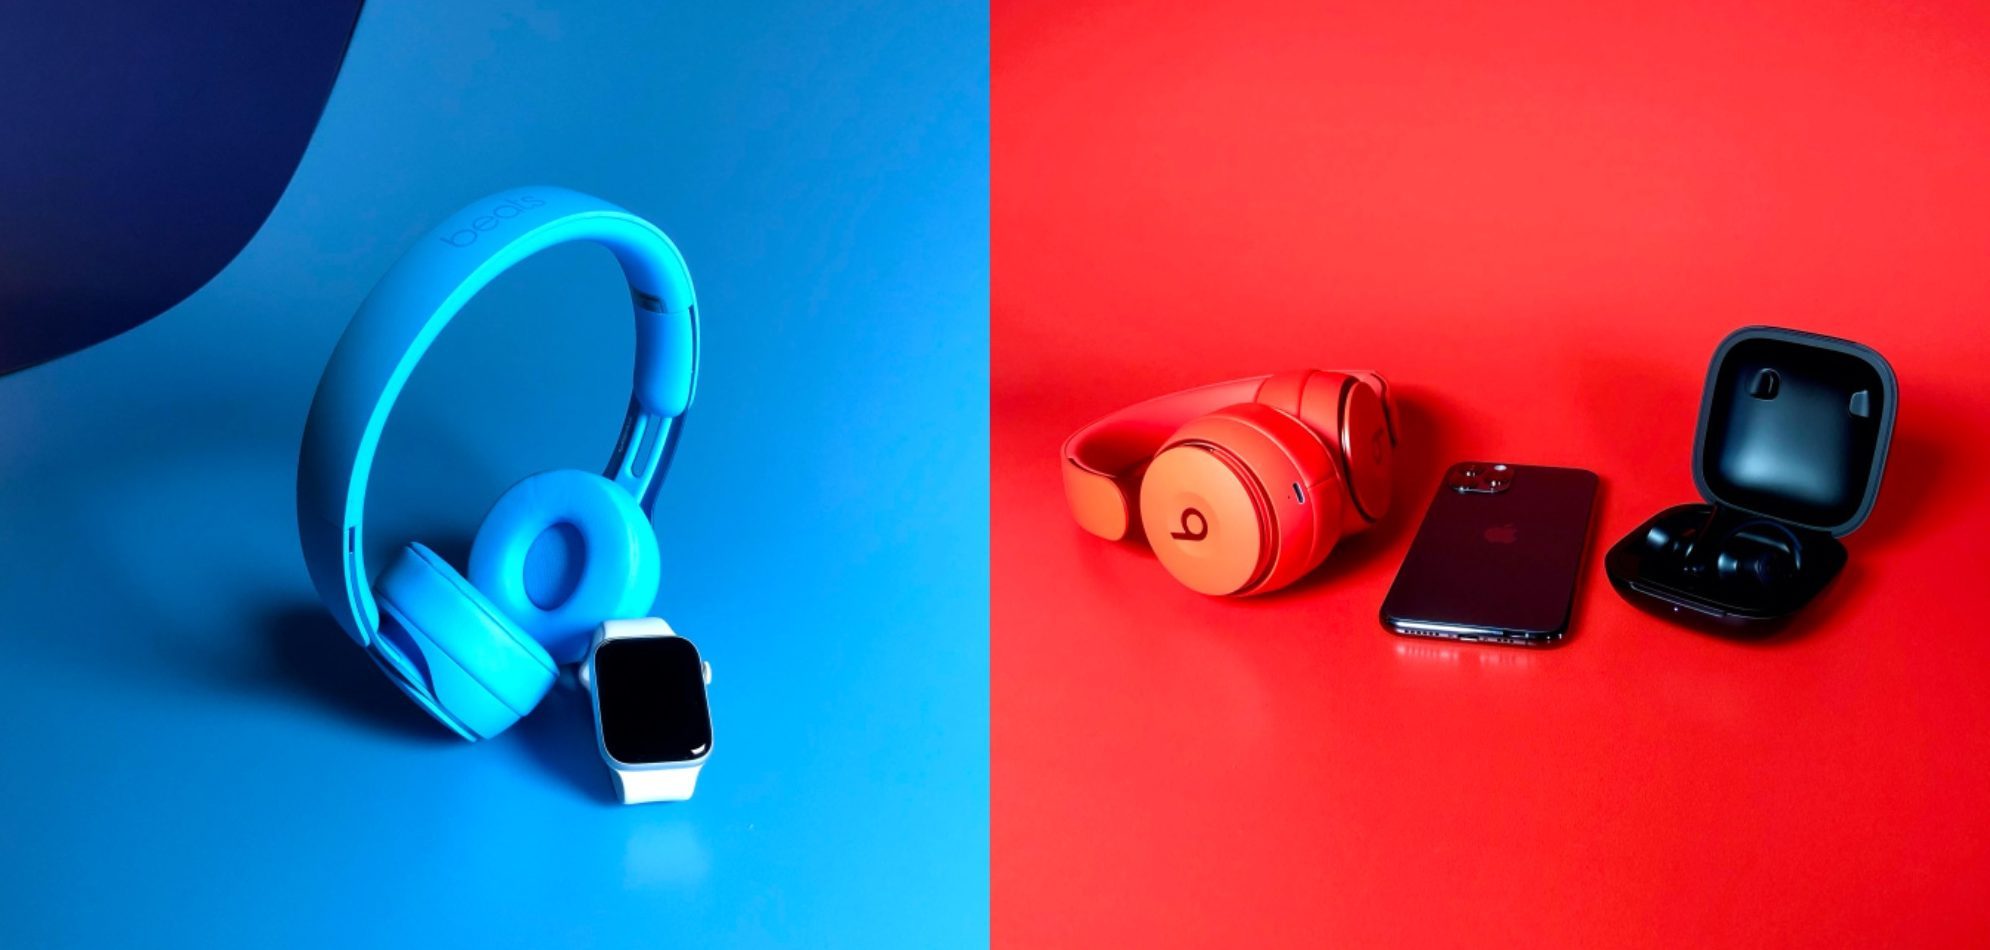 Apple's Over-Ear Headphones Features and Release Date